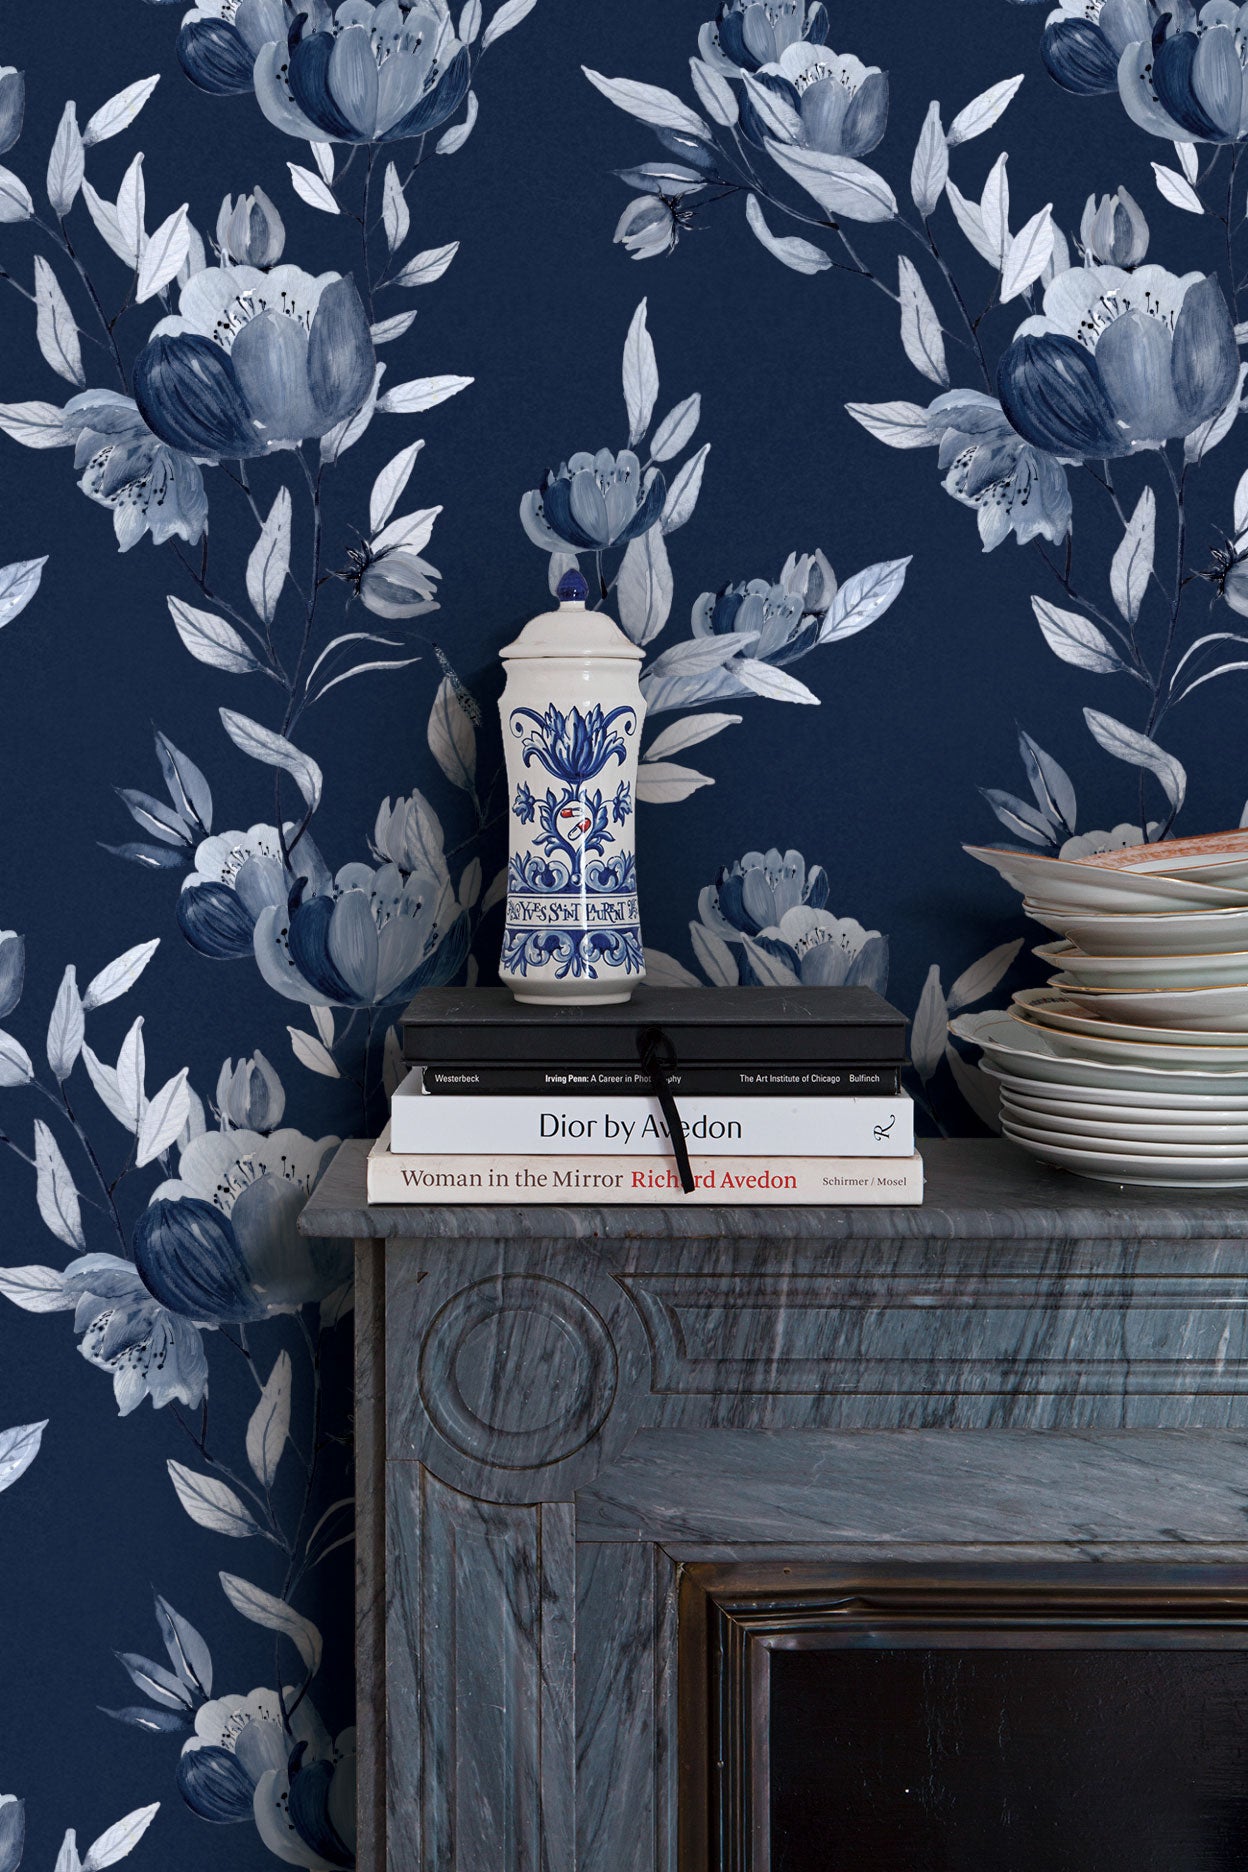 Indigo Blue Floral Peel and Stick Removable Wallpaper | Canada